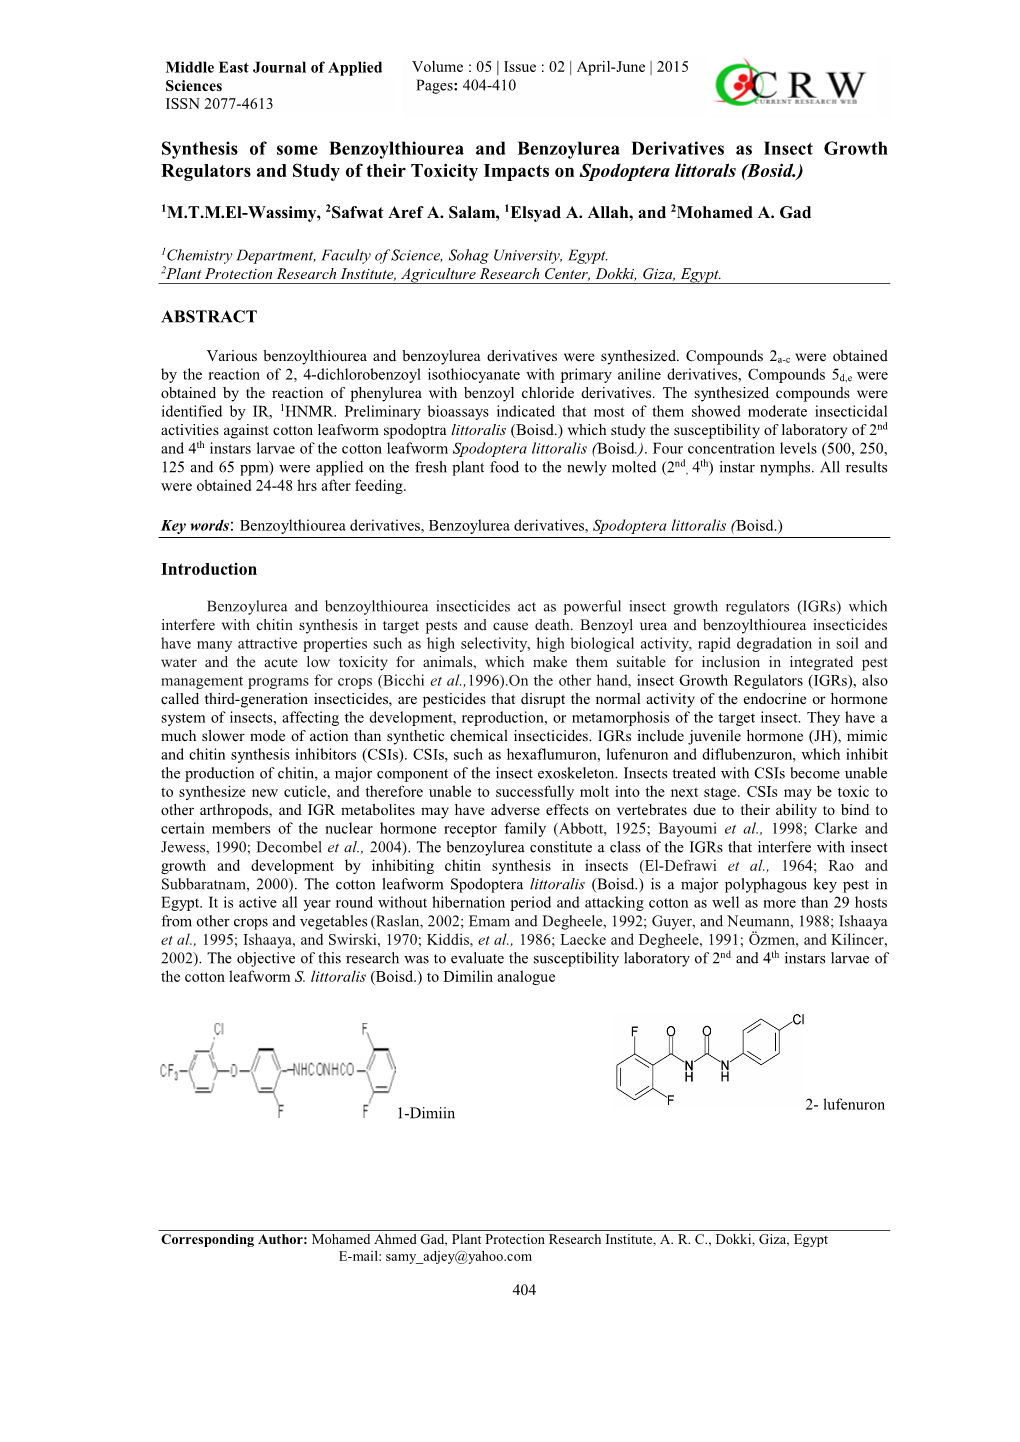 Synthesis of Some Benzoylthiourea and Benzoylurea Derivatives As Insect Growth Regulators and Study of Their Toxicity Impacts on Spodoptera Littorals (Bosid.)